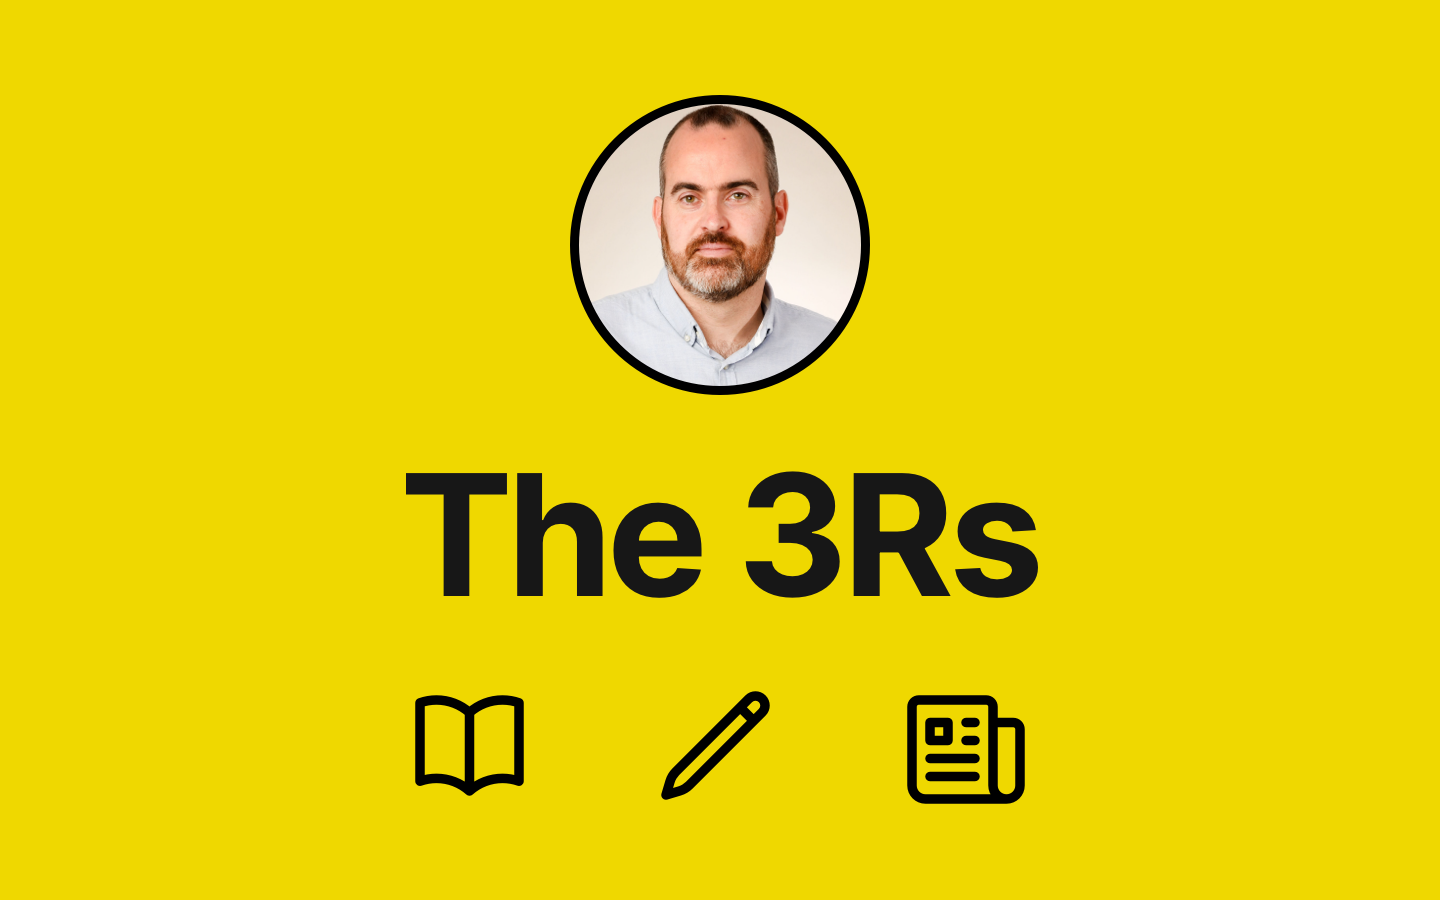 The 3Rs - Reading, writing, and research to be interested in #45 Post feature image